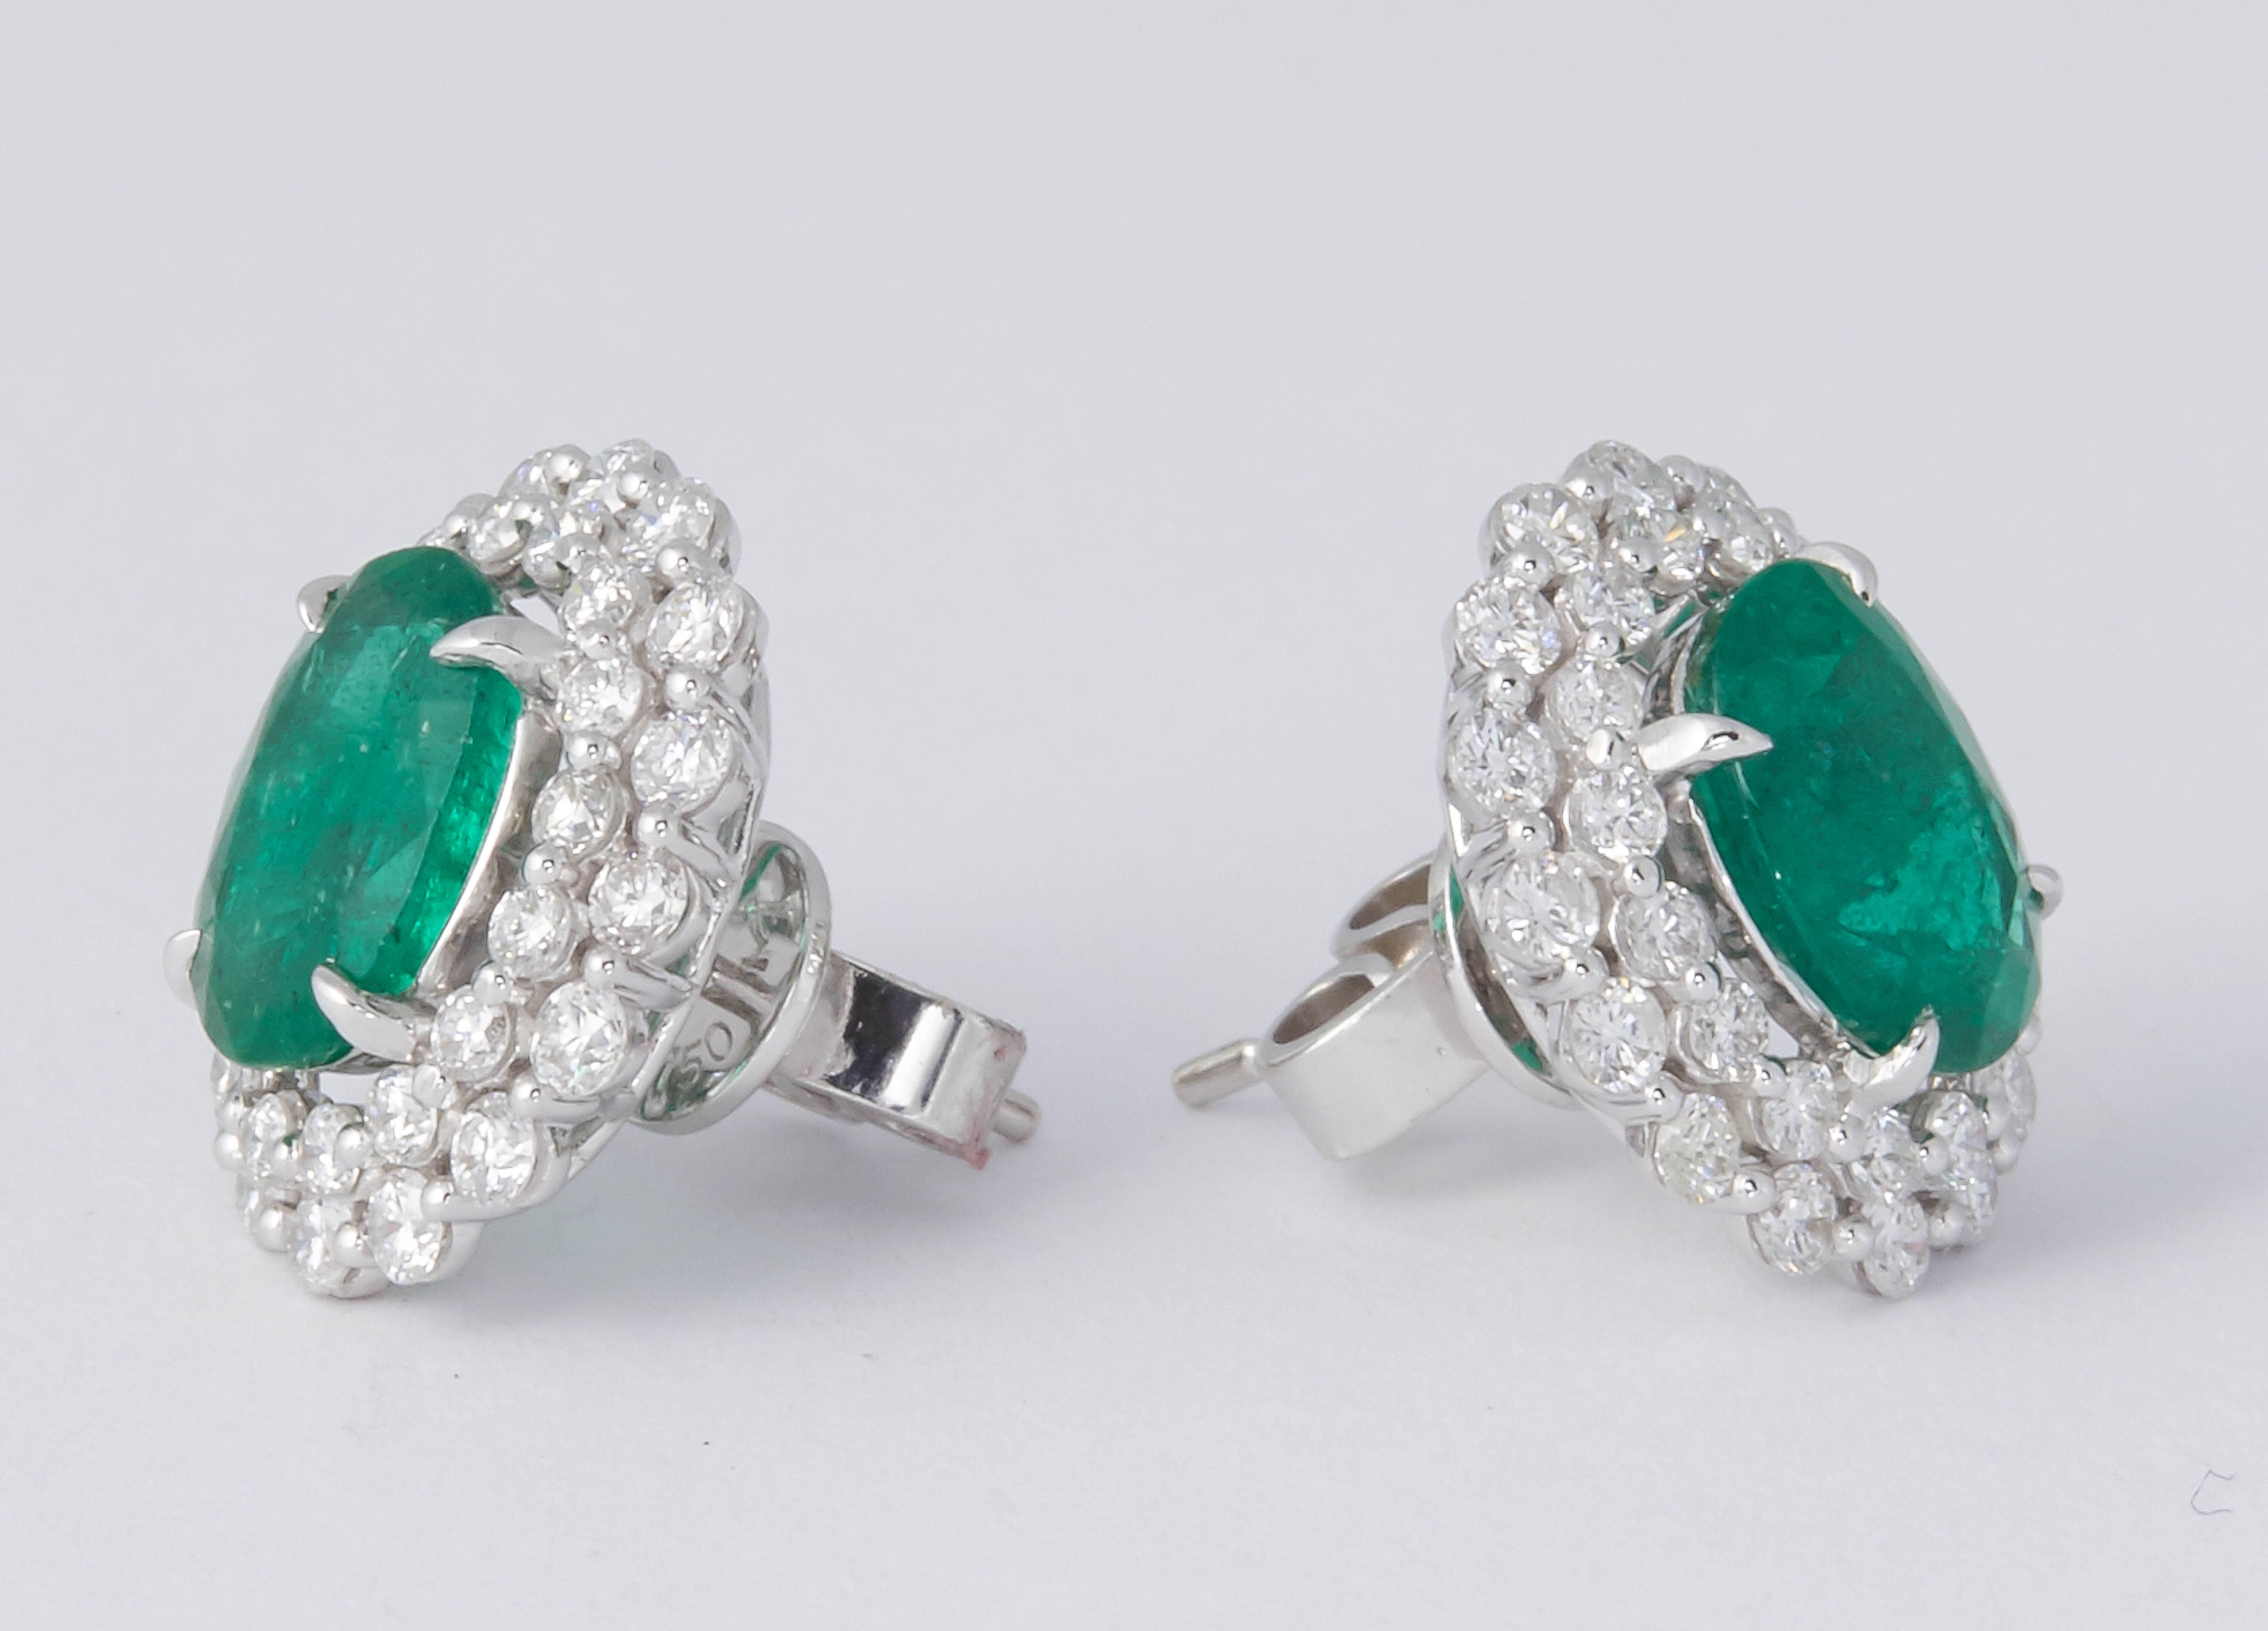 

Classic green emerald and diamond stud earrings. 

3.08 carats of fine green oval emeralds 

2.05 carats of round brilliant cut diamonds G VS

18k white gold 

Approximately 12.8 mm wide and 14.7 mm tall.